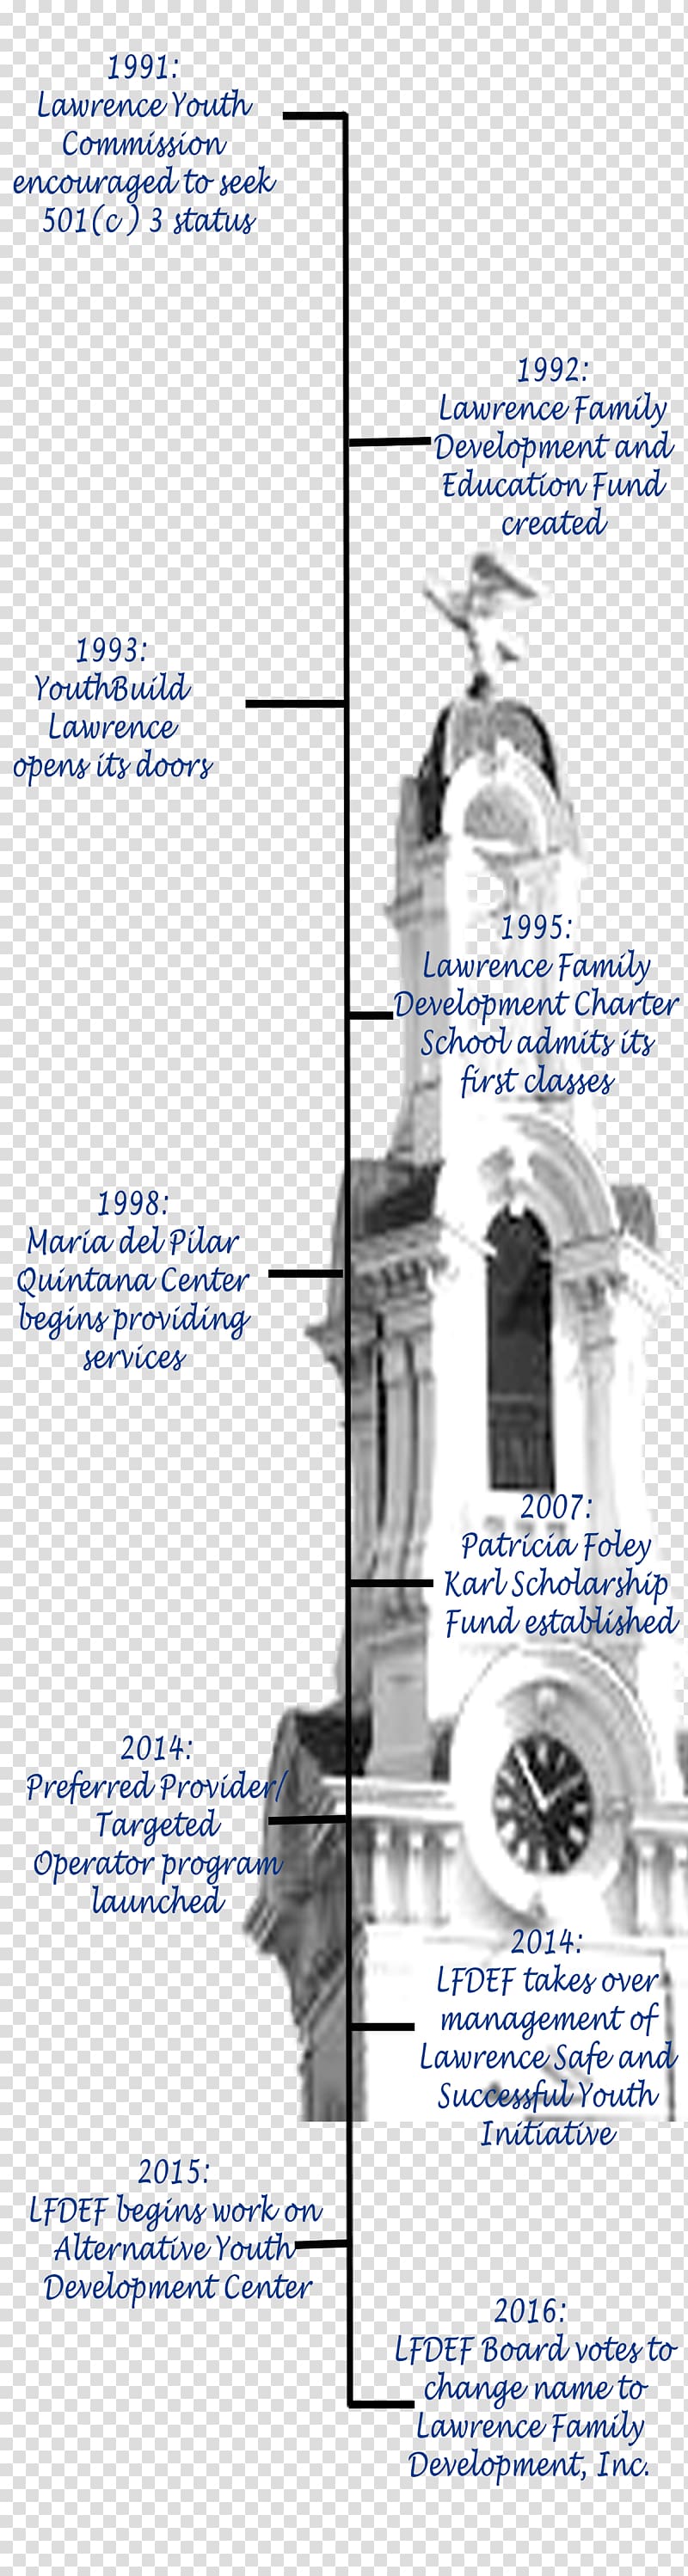 Lawrence Family Development Charter School Fall River 1912 Lawrence textile strike History Quintana Center, New Timeline transparent background PNG clipart